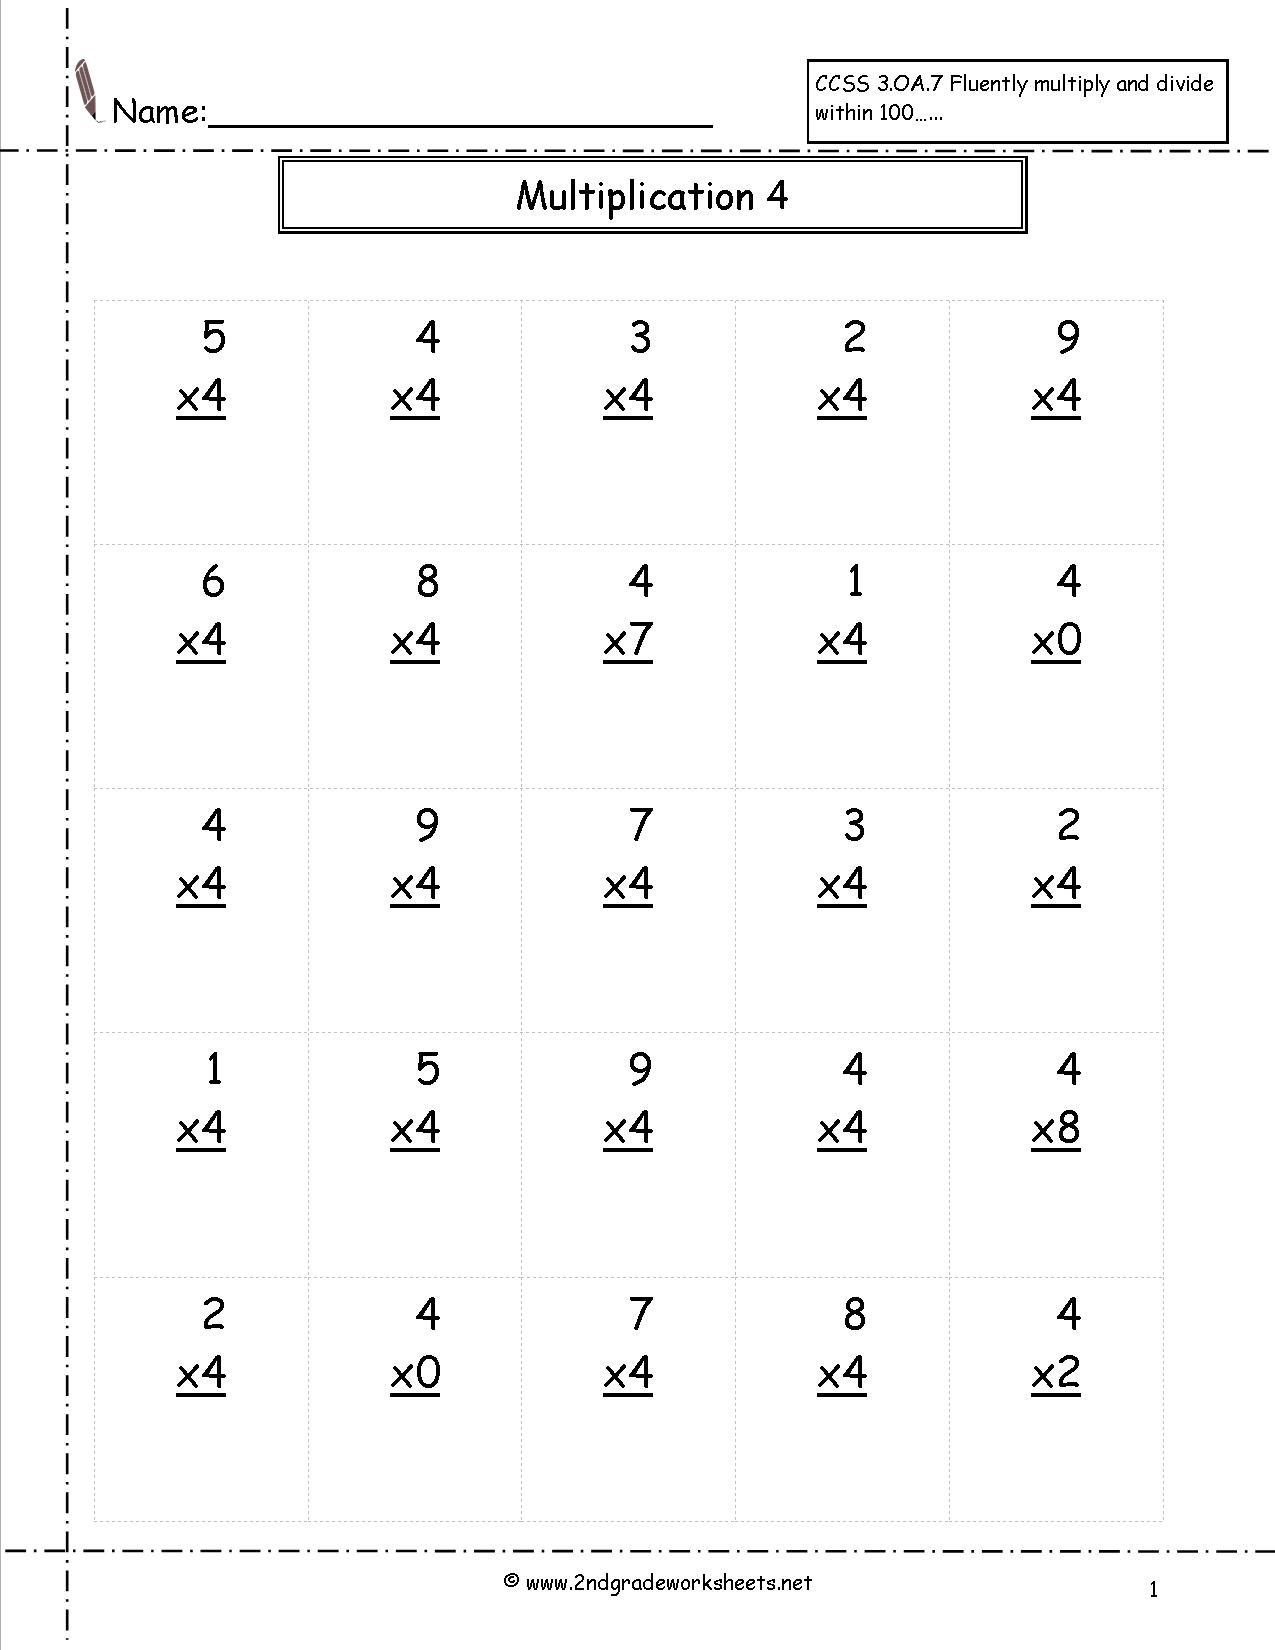 Multiplication Worksheets And Printouts throughout Multiplication Worksheets Number 6